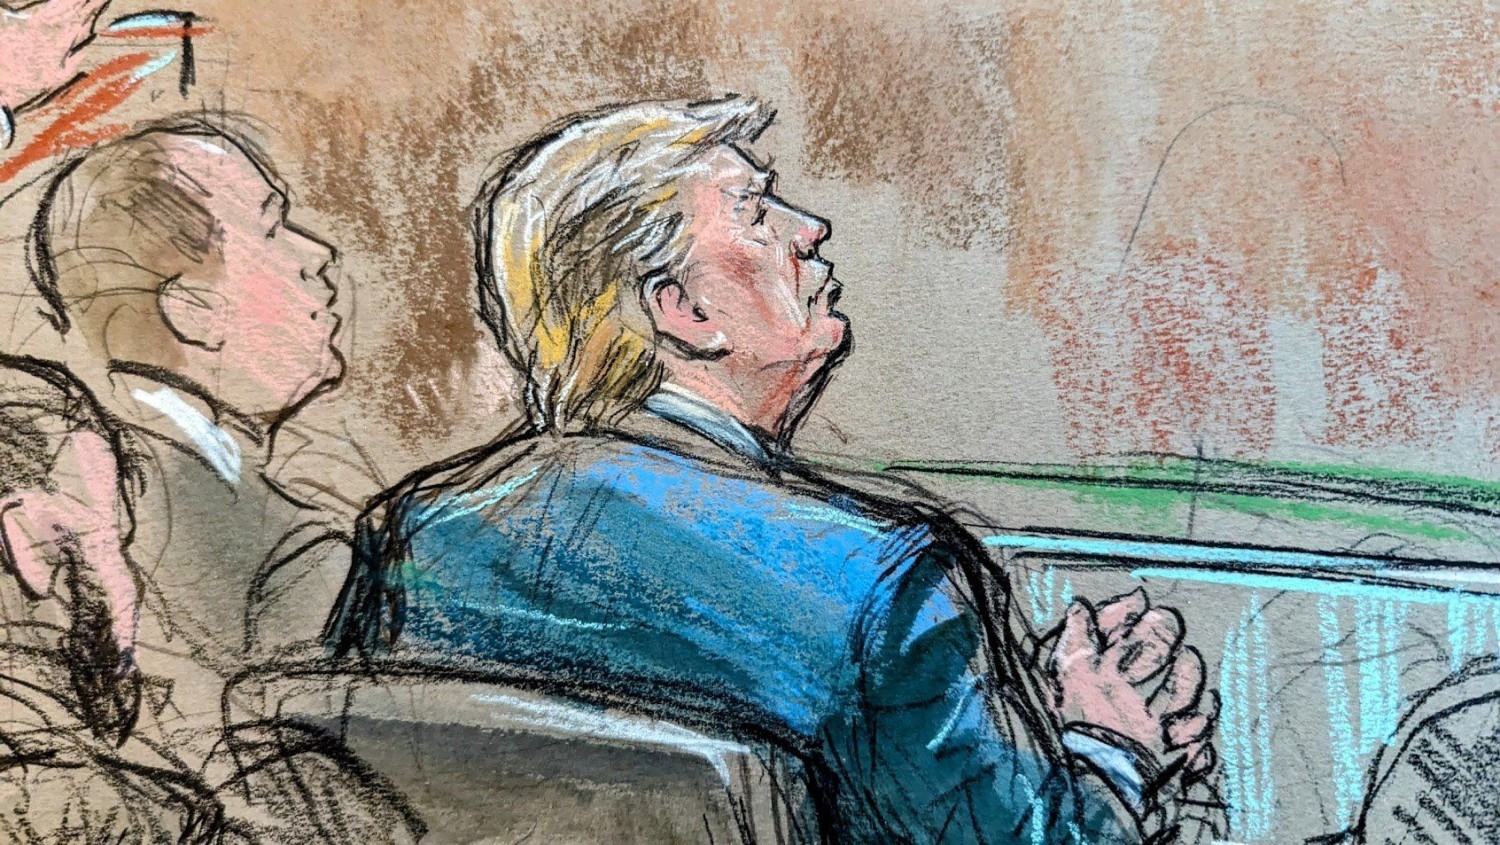 A federal appeals panel expressed deep skepticism Tuesday toward Donald Trump’s argument that he can’t be prosecuted for trying to overturn the 2020 election, raising the potentially extreme implications of absolute presidential immunity. Trump’s lawyers argued that his federal election subversion indictment should be dismissed because he is immune from prosecution. But the three judges on the US Court of Appeals for the District of Columbia Circuit panel questioned whether this immunity theory championed by Trump’s lawyers would allow presidents to sell pardons or even assassinate political opponents. Special counsel Jack Smith’s team argued that a president is not above the law, warning that allowing presidential immunity from prosecution would open a “floodgate” and saying that it would be “awfully scary” if there were no criminal mechanism to stop future president’s from usurping the vote and remaining in power. Still, the judges also wondered if they even have jurisdiction to decide the question of presidential immunity at this point in the case. Trump is scheduled to go on trial in March for his role in trying to overturn the 2020 election. He has pleaded not guilty. Trump chose to attend the hearing – a reminder of the role that his four criminal indictments are playing in his presidential campaign. The appeals court ruling is likely to set up a showdown over presidential immunity at the Supreme Court. The judges have not set a deadline but given the circumstances it’s unlikely they will take too much time. Here are the key takeaways from Tuesday’s oral arguments: Judges worry about scope and impact of Trump’s immunity argument The Circuit Court judges asked pointed questions of Trump attorney John Sauer over his claims that Trump has immunity because his actions after losing the 2020 election were part of his presidential duties. The judges also challenged him on his claim that Trump could only face criminal prosecution if he was first impeached and convicted by Congress for the same conduct. DC Circuit Court Judge Karen Henderson, an appointee of President George H.W. Bush, appeared dubious that Trump was acting within his official duties. “I think it is paradoxical to say that his constitutional duty to take care of the laws be faithfully executed allows him to violate criminal law,” Henderson said. Some of the judges pushed back on Trump’s immunity claims by highlighting the potentially dangerous path that it could lead to, with future presidents being able to brazenly break the law without consequences. This signaled their overall skepticism of Trump’s view, suggesting they are closer to where District Judge Tanya Chutkan landed – which was a strong rejection of Trump’s absolute immunity theory. Judge Florence Pan, a President Joe Biden nominee, posed some striking hypothetical questions to Sauer, to flesh out the bounds of his immunity argument. His legal theory claims former presidents are shielded from prosecution for official actions if there isn’t an impeachment and conviction by Congress first. “Could a president order SEAL Team 6 to assassinate a political rival? That is an official act, an order to SEAL Team Six,” Pan asked. “He would have to be, and would speedily be impeached and convicted before the criminal prosecution,” Sauer said. “I asked you a yes or no question,” Pan said. “If he were impeached and convicted first,” Sauer replied, later insisting that the “political process” of impeachment “would have to occur” before any prosecution could be initiated. Pan also peppered Sauer with hypotheticals about whether his immunity theory would also apply to a president selling pardons to criminals or selling military secrets to an enemy state. Assistant special counsel James Pearce later picked up on the judges’ line of thinking. “It would be awfully scary if there weren’t some sort of mechanism” to indict future ex-presidents if they similarly tried to stay in power despite losing an election, Pearce said. Key debate over whether Trump’s impeachment prevents prosecution Trump’s attorney Sauer argued that a president can only be criminally charged and tried following a conviction for the alleged actions in the Senate. He had been acquitted by the Senate in February 2021. Pan questioned Sauer over his contention that impeachment and conviction by Congress was required for any criminal prosecution – while also pressing him to acknowledge that he was conceding that there is a path for presidents to face prosecution. “Once you concede that presidents can be prosecuted under some circumstances, your separation of powers argument falls away, and the issues before us are narrowed to are you correct in your interpretation of the impeachment judgment clause?” Pan said. The judge noted that many senators relied on the idea that it would be up to the Justice Department to handle an investigation into Trump’s actions following the 2020 election when they were considering whether to convict Trump following his impeachment. Sauer repeated at the end of Tuesday’s hearing that a former president could be prosecuted for “official acts” if they were first convicted by the Senate during impeachment proceedings. “Say the president was impeached and convicted on a charge of incitement of insurrection,” Pan asked, “then the government could bring a prosecution for the same or related conduct?” “Correct,” Sauer said. Trump lawyer says immunity keeps shut ‘Pandora’s box’ for indicting presidents Sauer painted a picture of what he called a dangerous “Pandora’s box” of indicting former presidents for actions they took while in office. He argued that special counsel Jack Smith’s decision to bring charges against Trump could lead to similar prosecutions. He warned that this case could theoretically lead to charges against Biden, Barack Obama or George W. Bush. “To authorize the prosecution of a president for his official acts would open up Pandora’s box from which this nation may never recover,” Sauer said. If the judges rule against absolute presidential immunity, Sauer said, “It would authorize, for example, the indictment of President Biden in the Western District of Texas after he leaves office for mismanaging the border, allegedly.” Taking the hypotheticals even farther, Sauer looked back to history, and raised the possibility of past presidents being charged for some of their most controversial official actions. “Could George W. Bush be prosecuted for obstruction of an official proceeding for allegedly giving false information to Congress, to induce the nation to go to war in Iraq under false pretenses? … Could President Obama be potentially charged for murder for allegedly authorizing drone strikes targeting US citizens located abroad?” Questions over jurisdiction – can this court even rule on the issue now? Before the judges got to the meat of Trump’s arguments Tuesday morning, they pressed his attorney on whether they should even be reviewing his immunity claims before his trial concludes. “Before you get started, can I just get a couple of things on the record? Our jurisdiction was challenged by an amicus. But from your reply brief you are not questioning (our decision to review the immunity claims),” Henderson asked Sauer, referring to a friend-of-the-court brief filed by the watchdog group American Oversight. The group argued the appellate court doesn’t have the authority to take up Trump’s immunity appeal before trial. The group says that unless there is an explicit constitutional or statutory guarantee cited that would stop a trial from occurring, the issue should be left for appeal after the trial. The argument offers a potential offramp for the appeals court to sidestep the immunity issue for now. The fact that the judges brought up the issue suggests they could have an interest in going that route. But if they did and Trump was convicted, the issue would likely be back before them in due time. Not only does Trump’s attorney think the appeals court has the authority to hear the immunity dispute right now, the special counsel’s team also believes the intermediate court can review the matter before Trump’s trial concludes. “It is our view that the court has and should entertain both claims before it,” Pearce told the judges on Tuesday before launching into his arguments against Trump’s immunity claims. The special counsel’s office had already tried to skip the appeals court and ask the Supreme Court to take up the issue, but the justices rejected that proposal. Trump is seen but not heard in court Trump attended Tuesday’s hearing, though he was not seen as he entered and exited the Washington, DC, courtroom, where cameras were barred but audio of the proceeding was broadcast. Trump was seated at the defense table roughly 20 feet away from Smith, who also attended Tuesday’s hearing. While the special counsel’s argument was ongoing, Trump was taking notes and passing them to Sauer. The former president chose to attend Tuesday’s hearing even as the Iowa caucuses are less than a week away – a decision that underscores both Trump’s comfortable lead in the Iowa polls as well as how attacking the criminal prosecutions against him has become a lynchpin of Trump’s campaign strategy. Trump will head to Iowa on Wednesday for a Fox News town hall, but he will then return to New York on Thursday so he can watch the closing arguments in his civil fraud trial, where the New York attorney general is seeking to collect $370 million in damages and to bar Trump from doing business in the state. After the hearing, Trump went to the site of his former Washington, DC, hotel to speak on camera. “I feel that as a president, you have to have immunity, very simple,” Trump said.